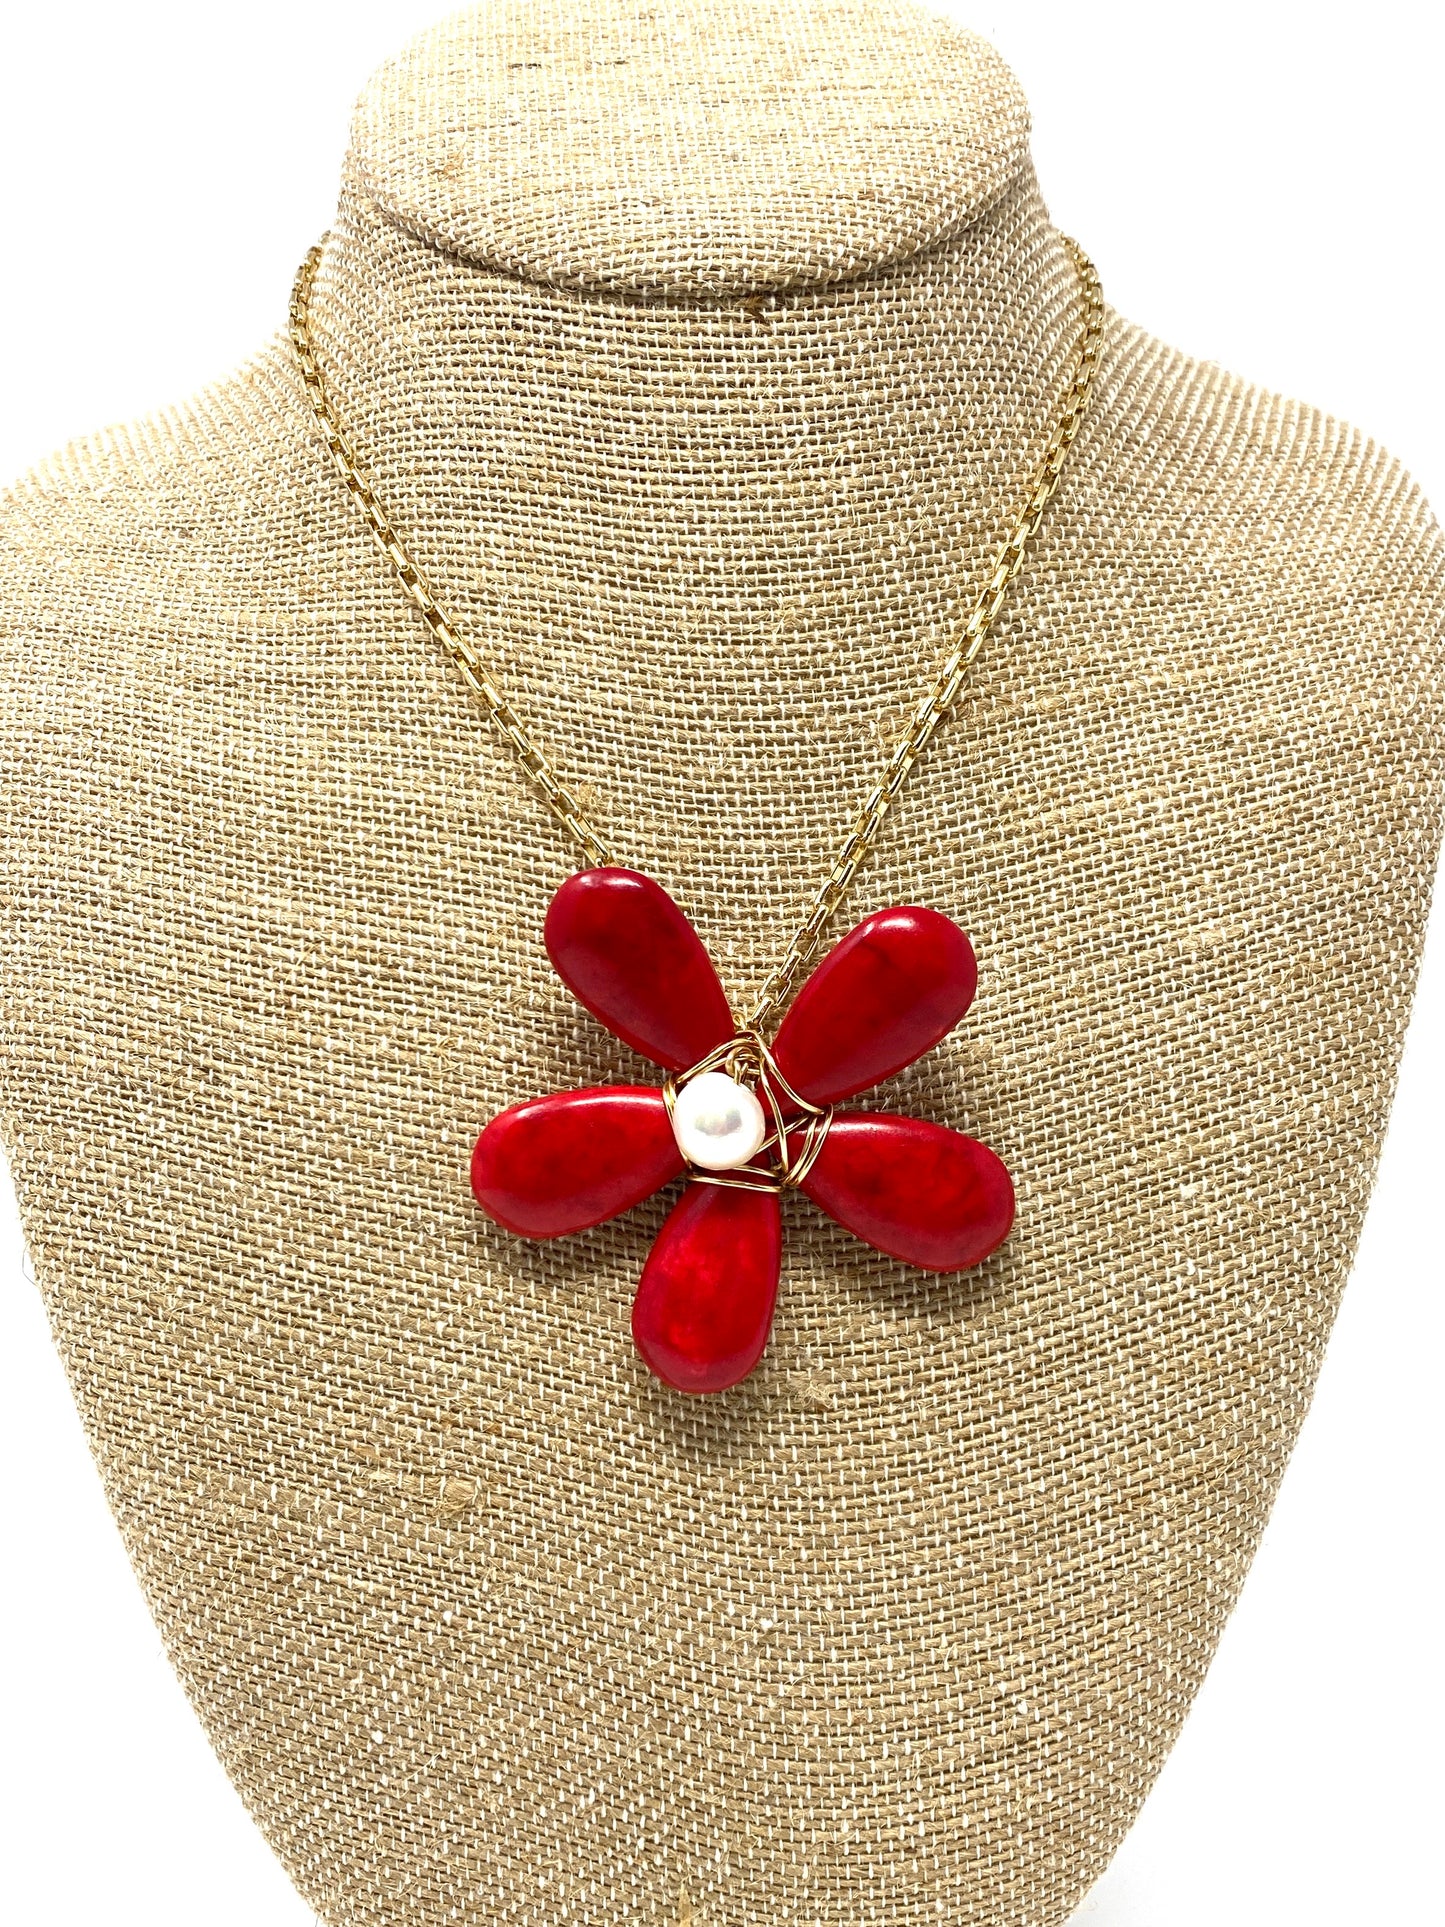 Gold Filled Chain Necklace With Red Turquoise and Pearl Flower Pendant